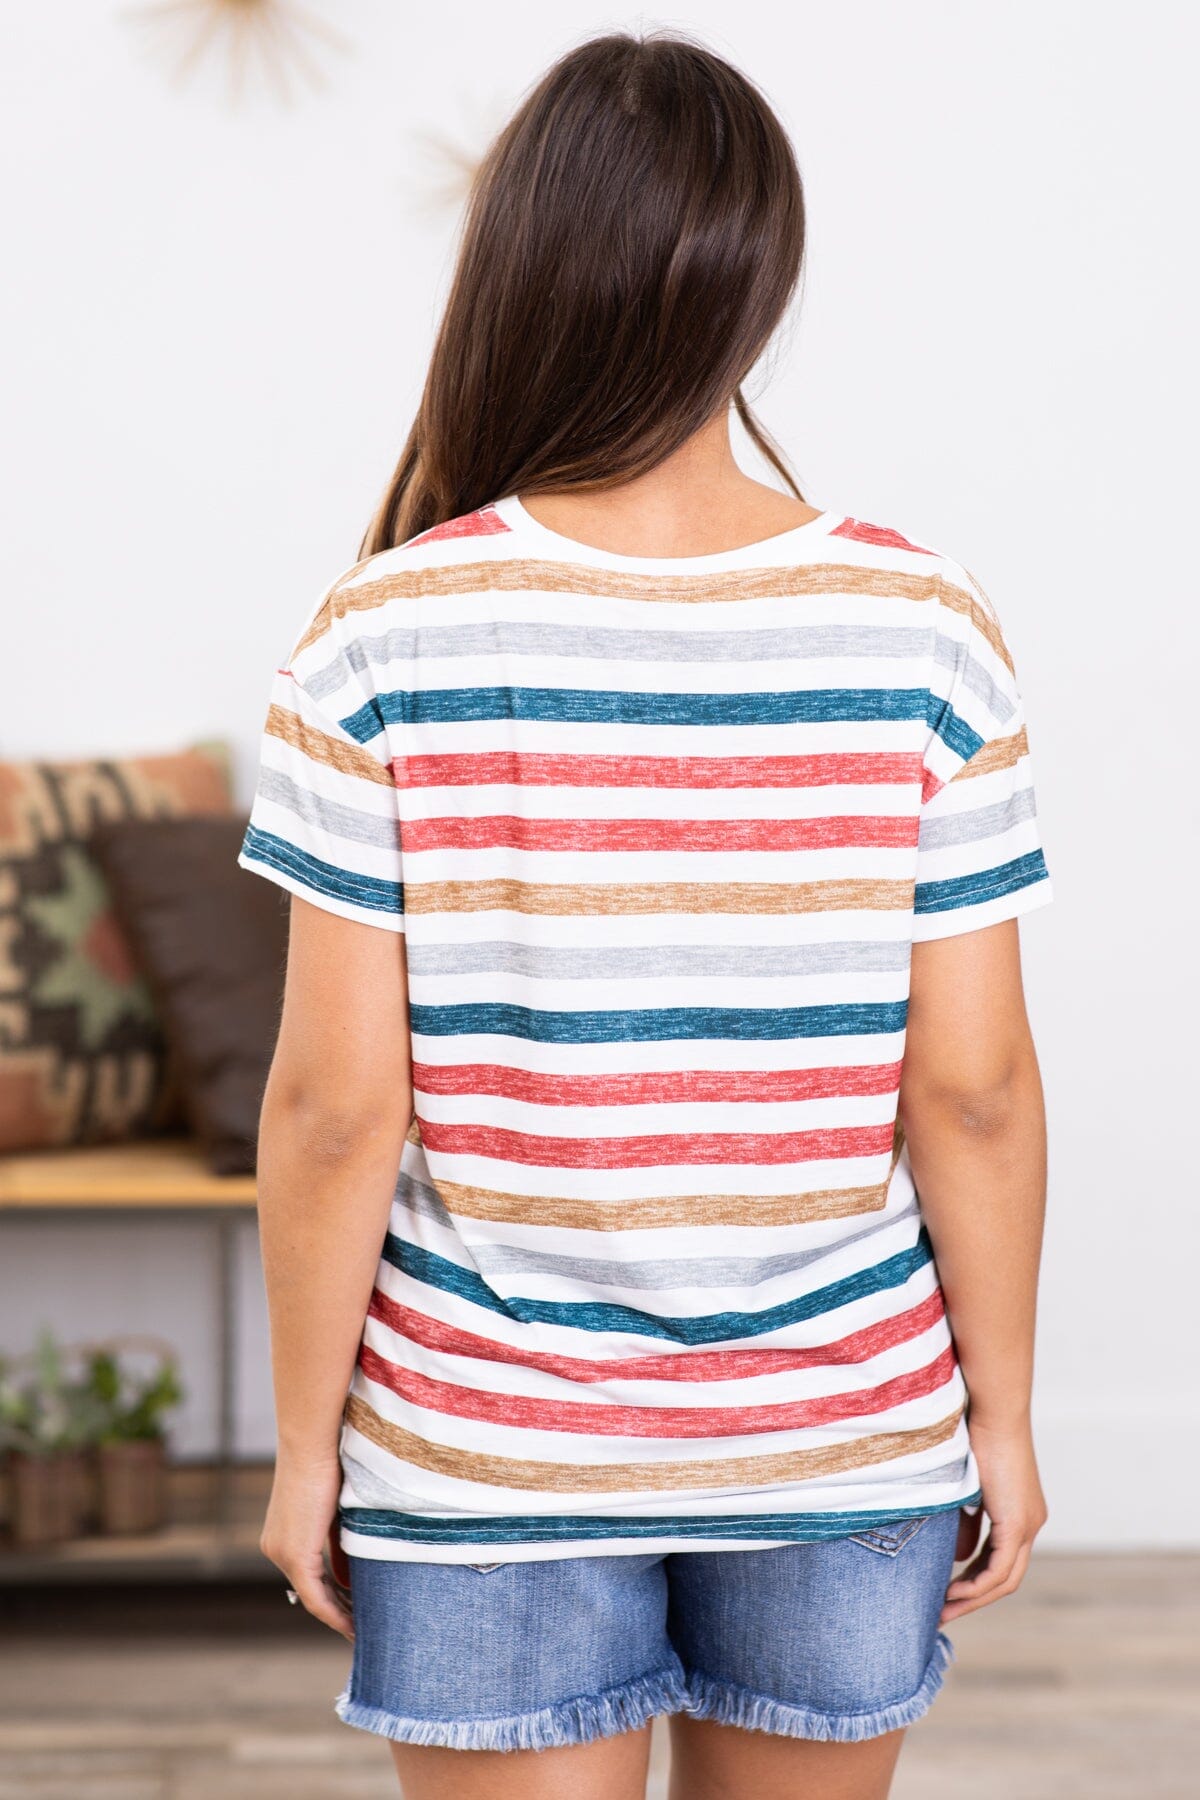 Terra Cotta and Teal Multicolor Stripe Top - Filly Flair